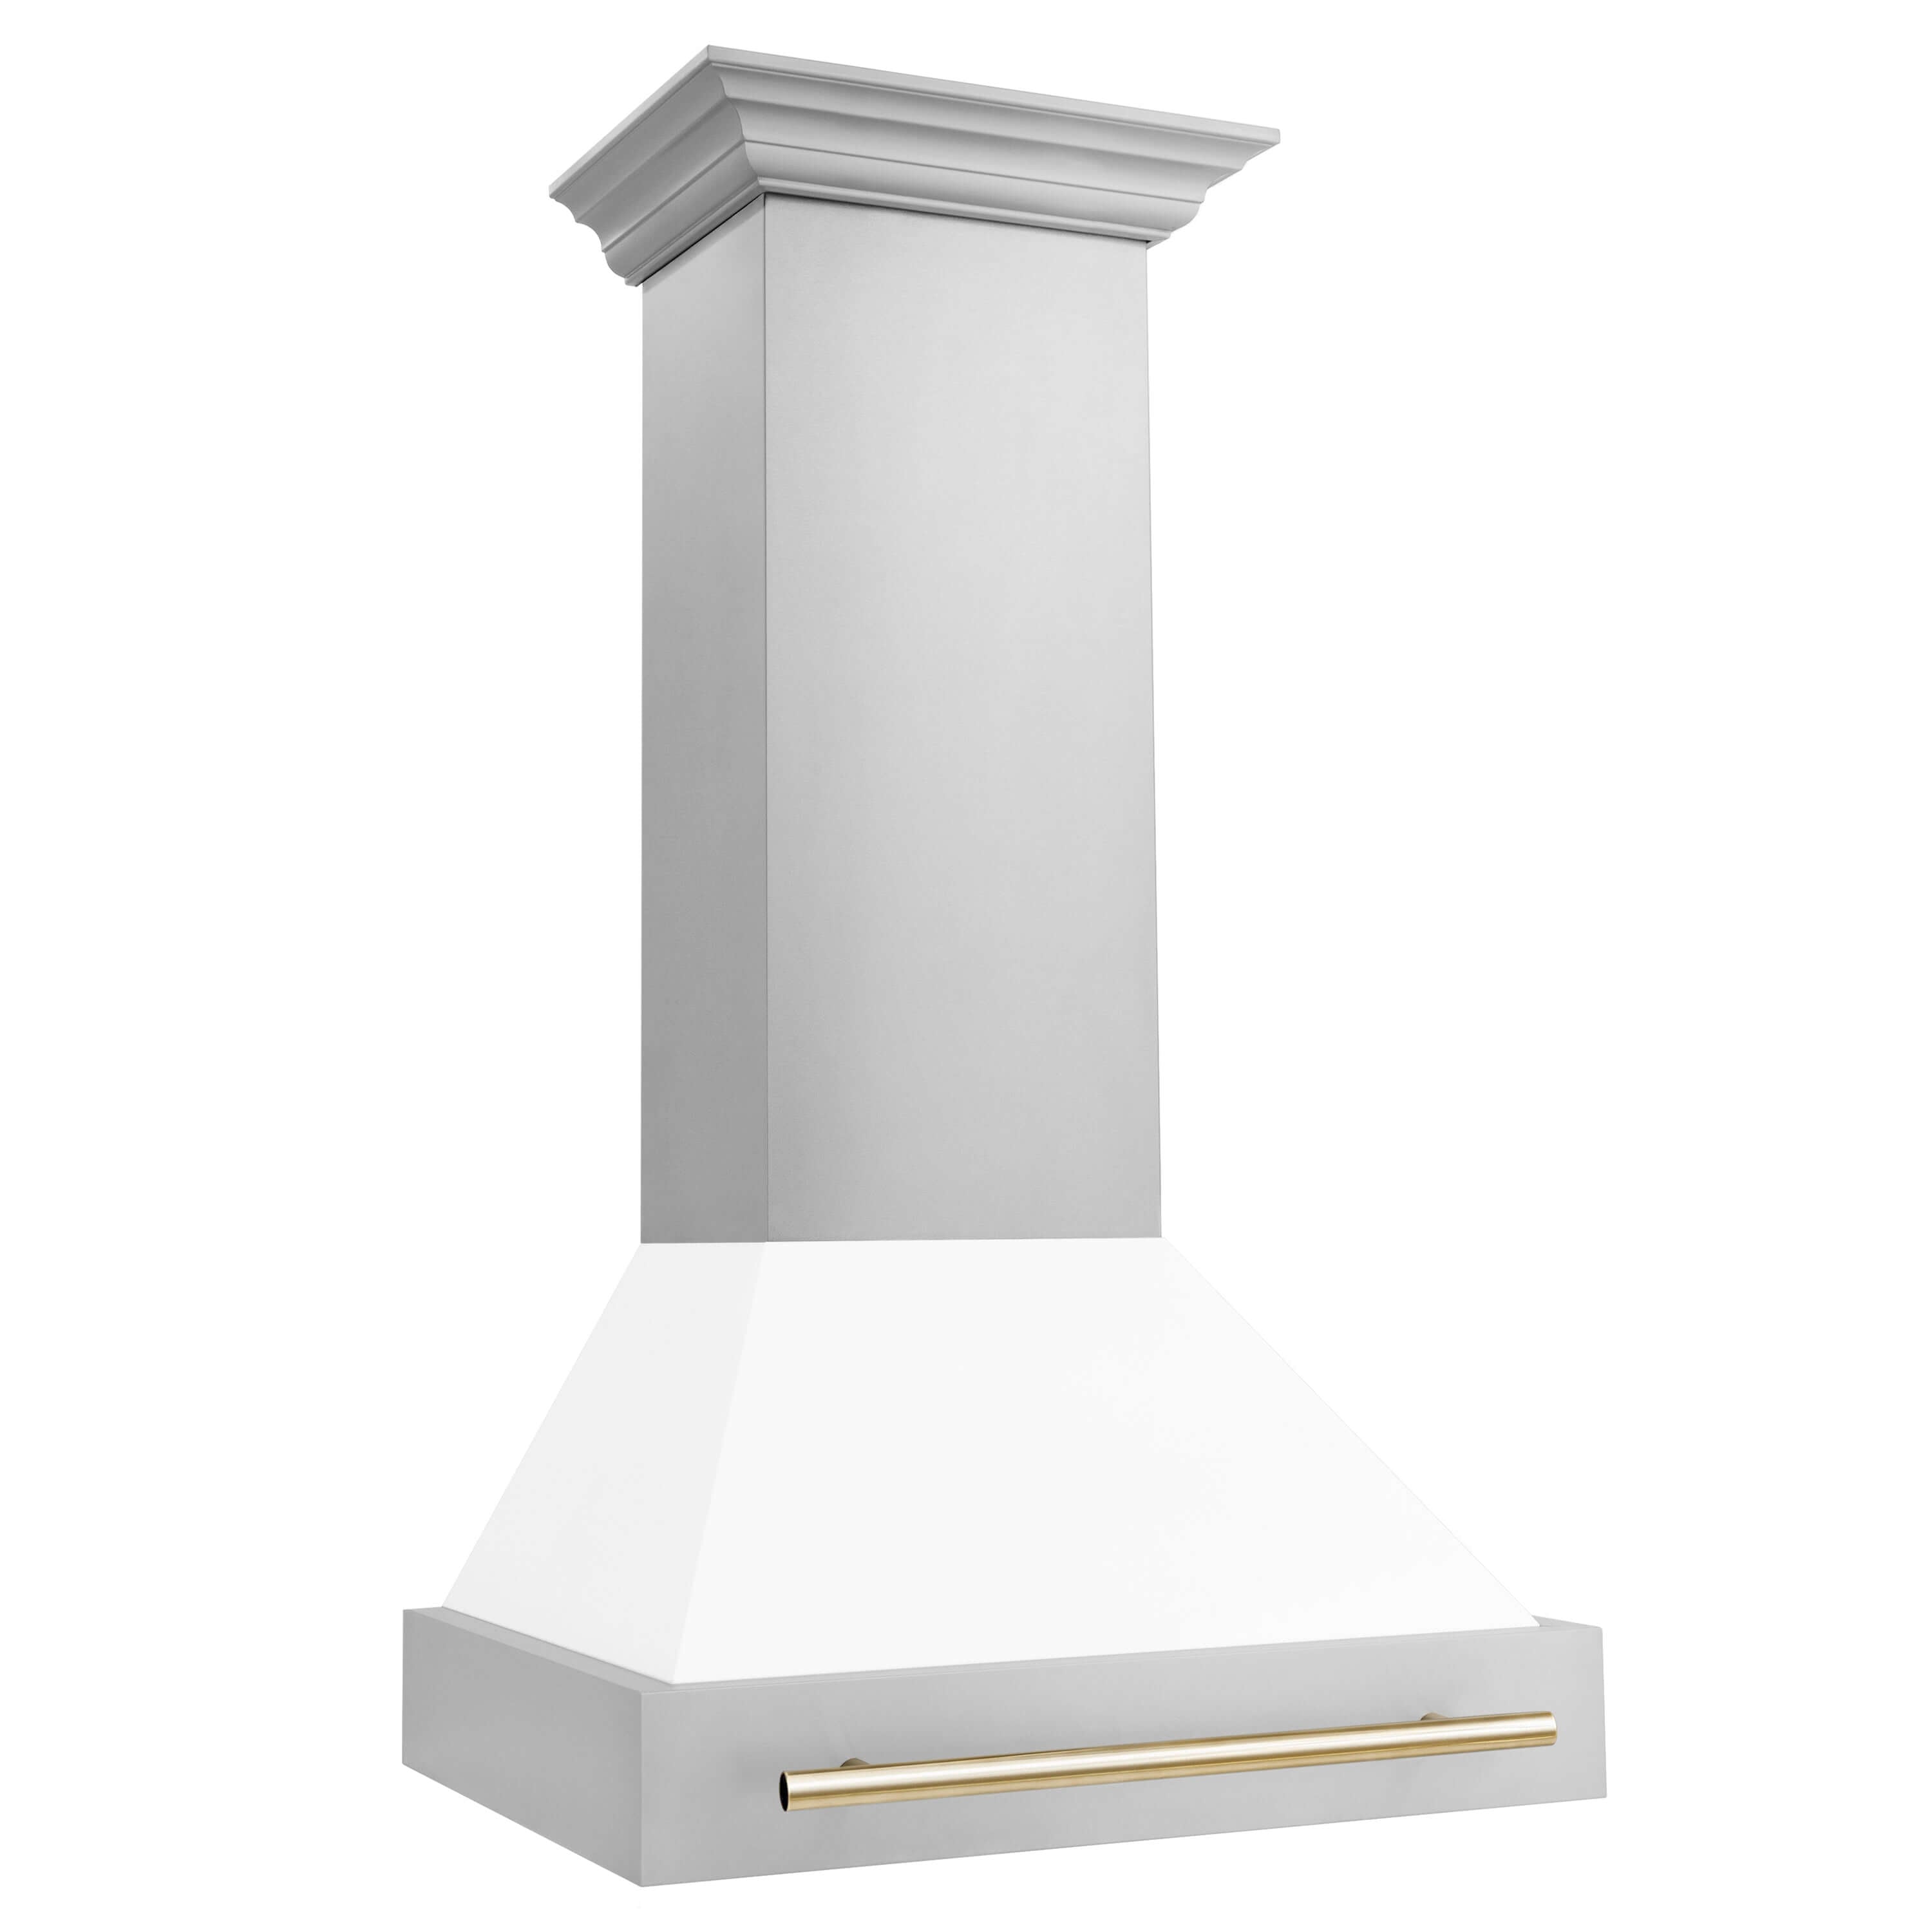 ZLINE Autograph Edition 30" Range Hood with White Matte Shell and Polished Gold accents (8654STZ-WM30-G) side